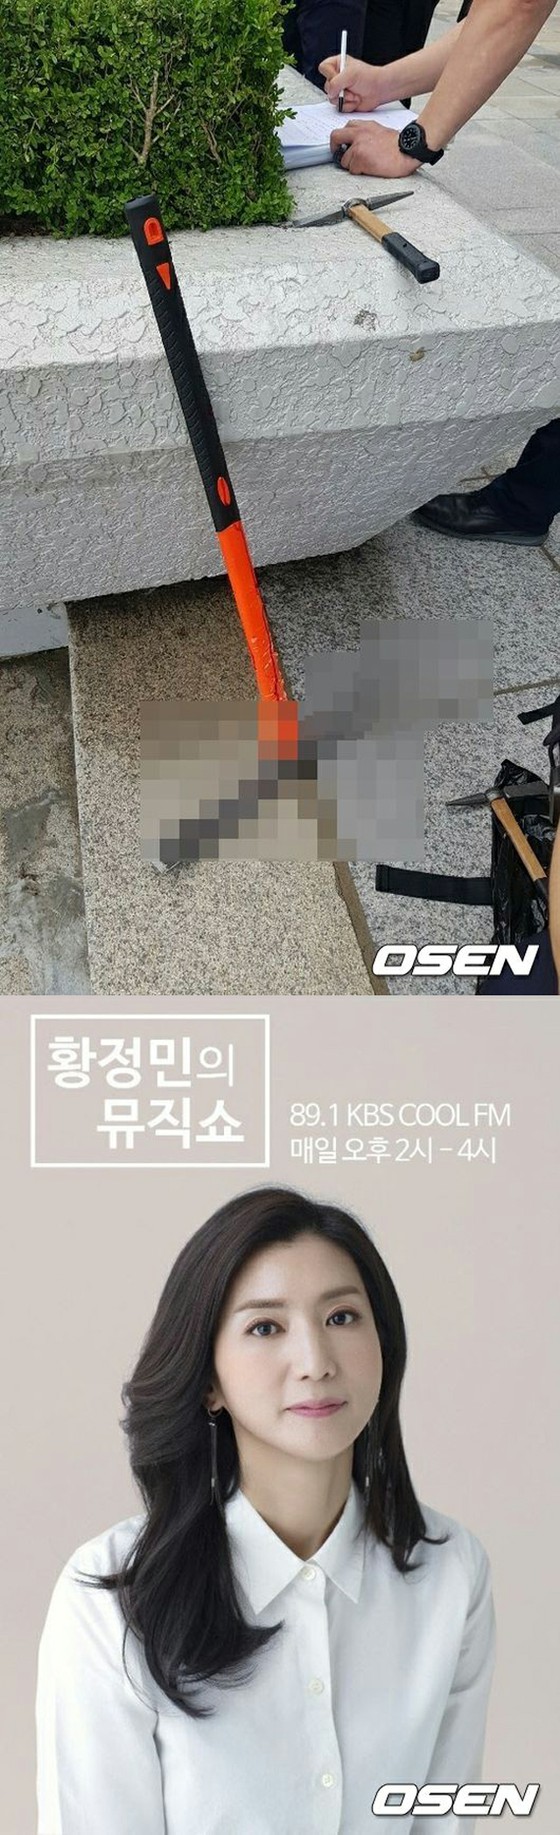 KBS, glass windows were broken at a open studio during live broadcasting...